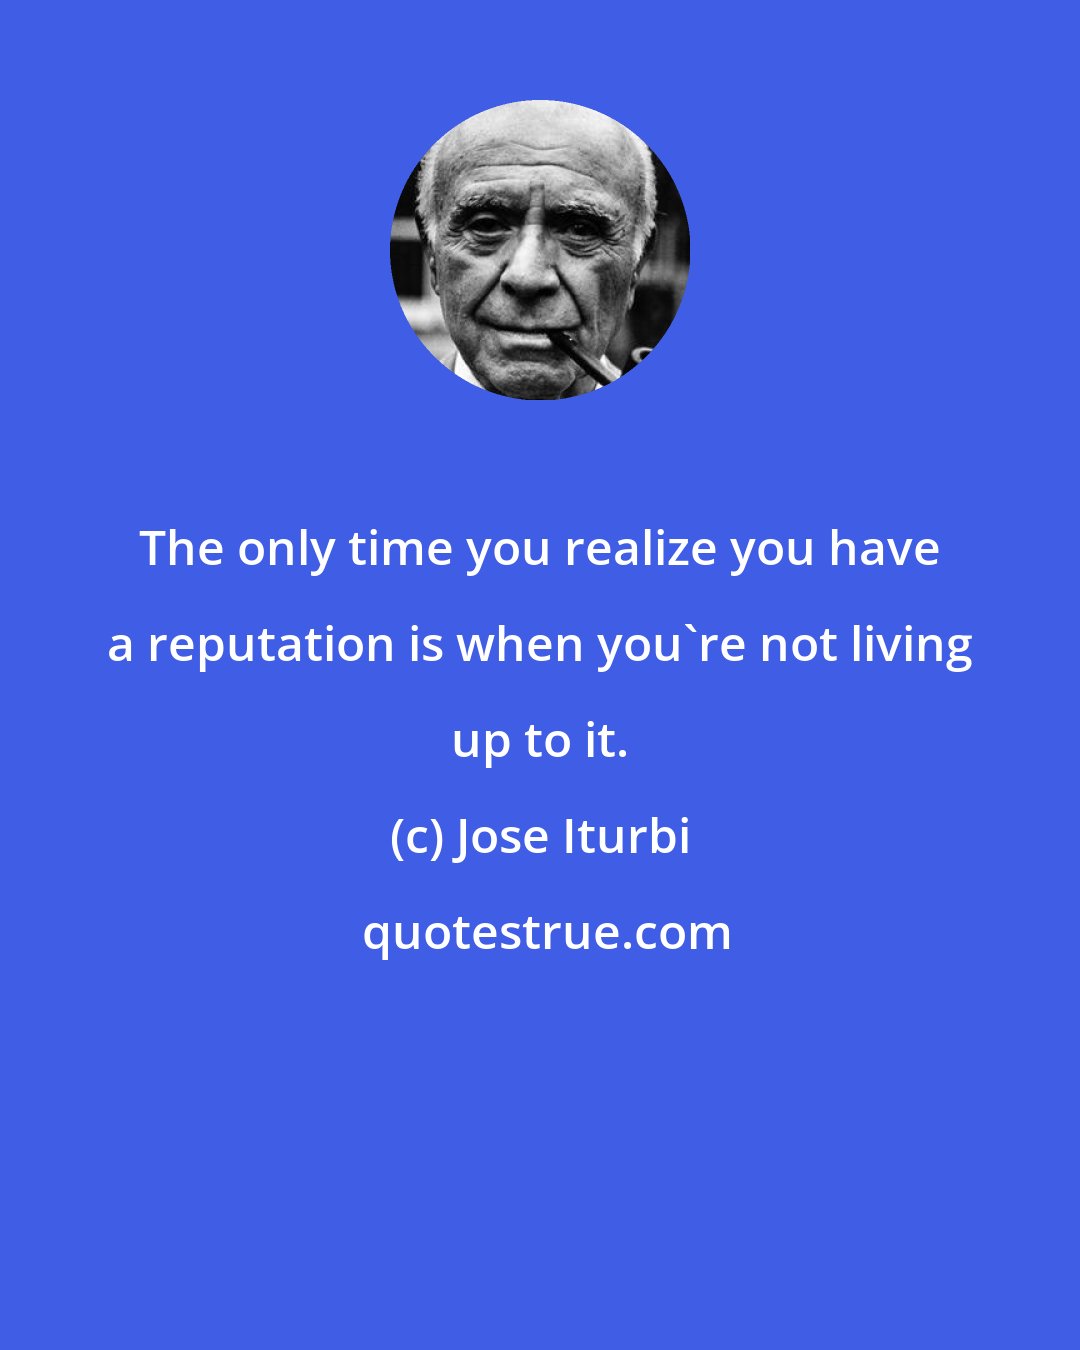 Jose Iturbi: The only time you realize you have a reputation is when you're not living up to it.